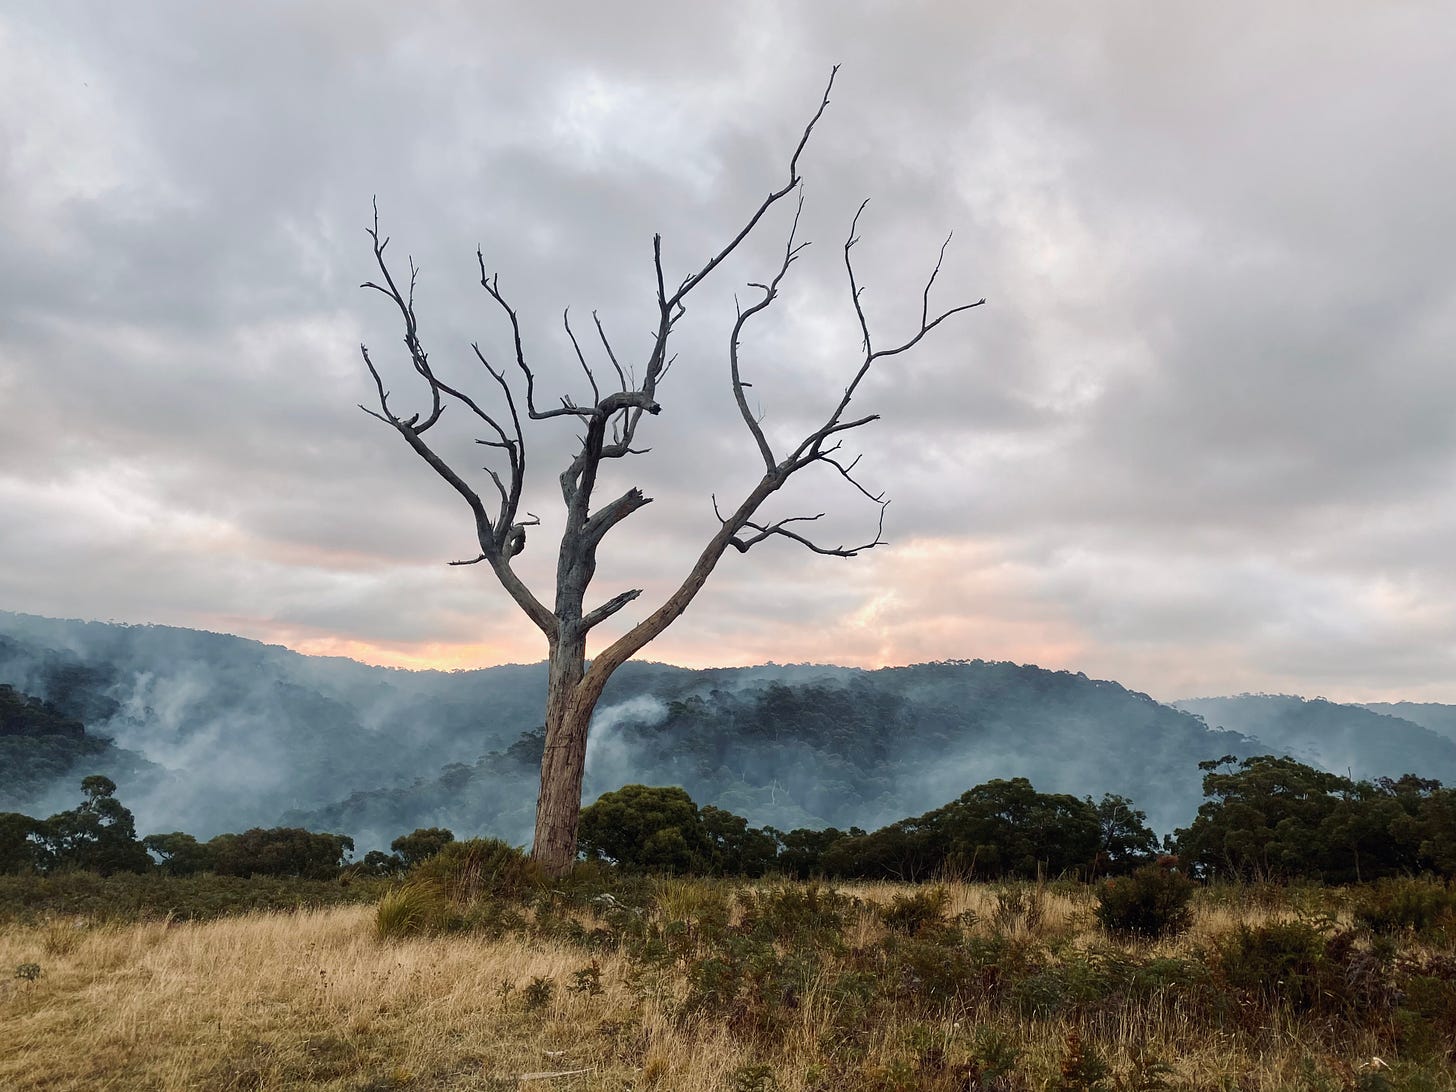 A dead tree in a field with mountain ranges and a pink sunset in the background obscured by smoke from a fire